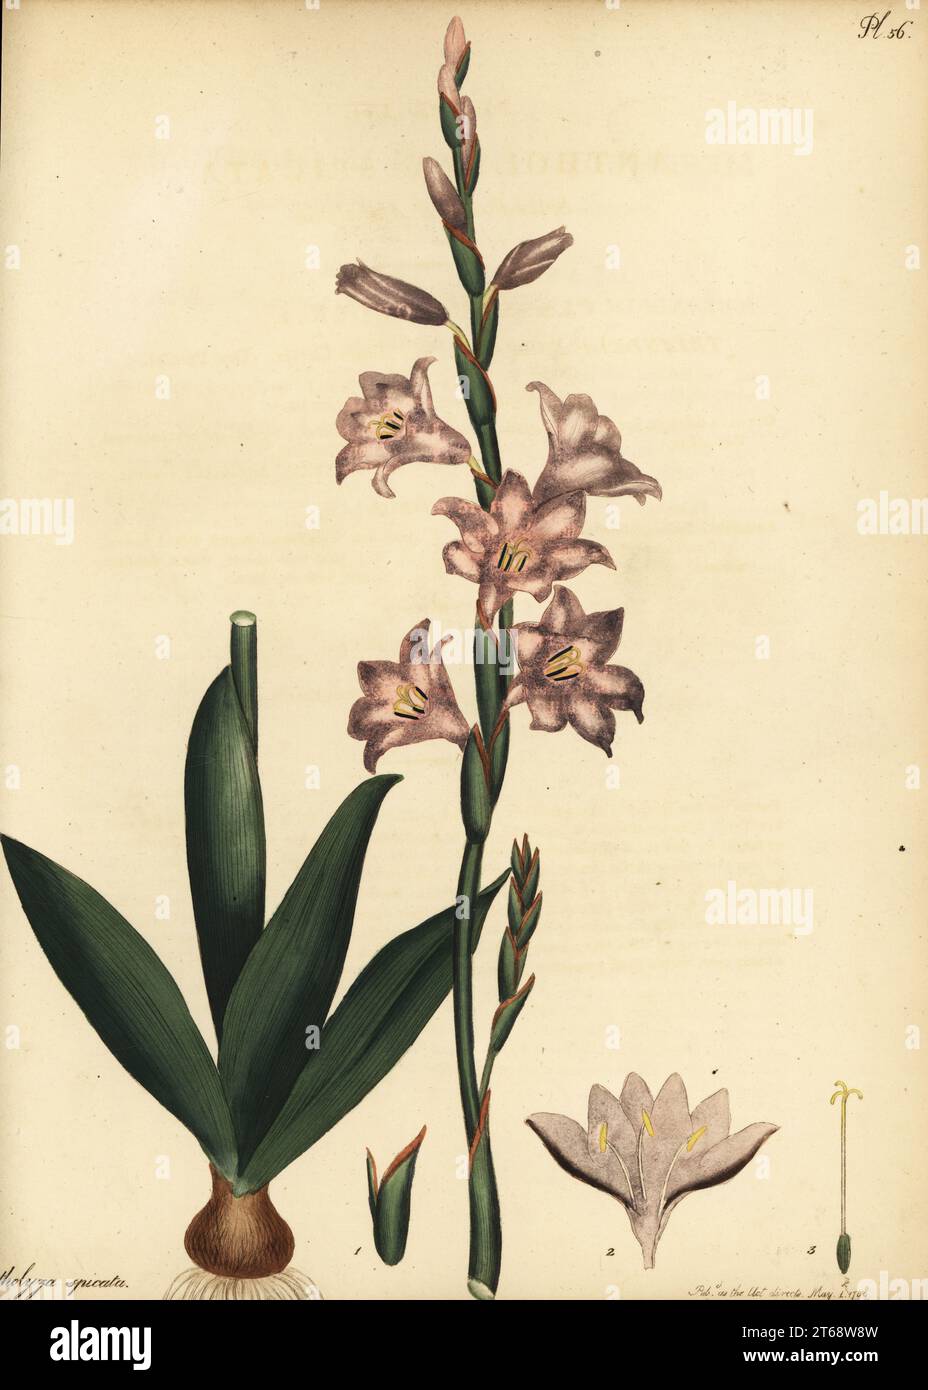 Watsonia laccata, Cape of Good Hope, South Africa. Spike flowered antholyza, Antholyza spicata. Copperplate engraving drawn, engraved and hand-coloured by Henry Andrews from his Botanical Register, Volume 1, published in London, 1799. Stock Photo